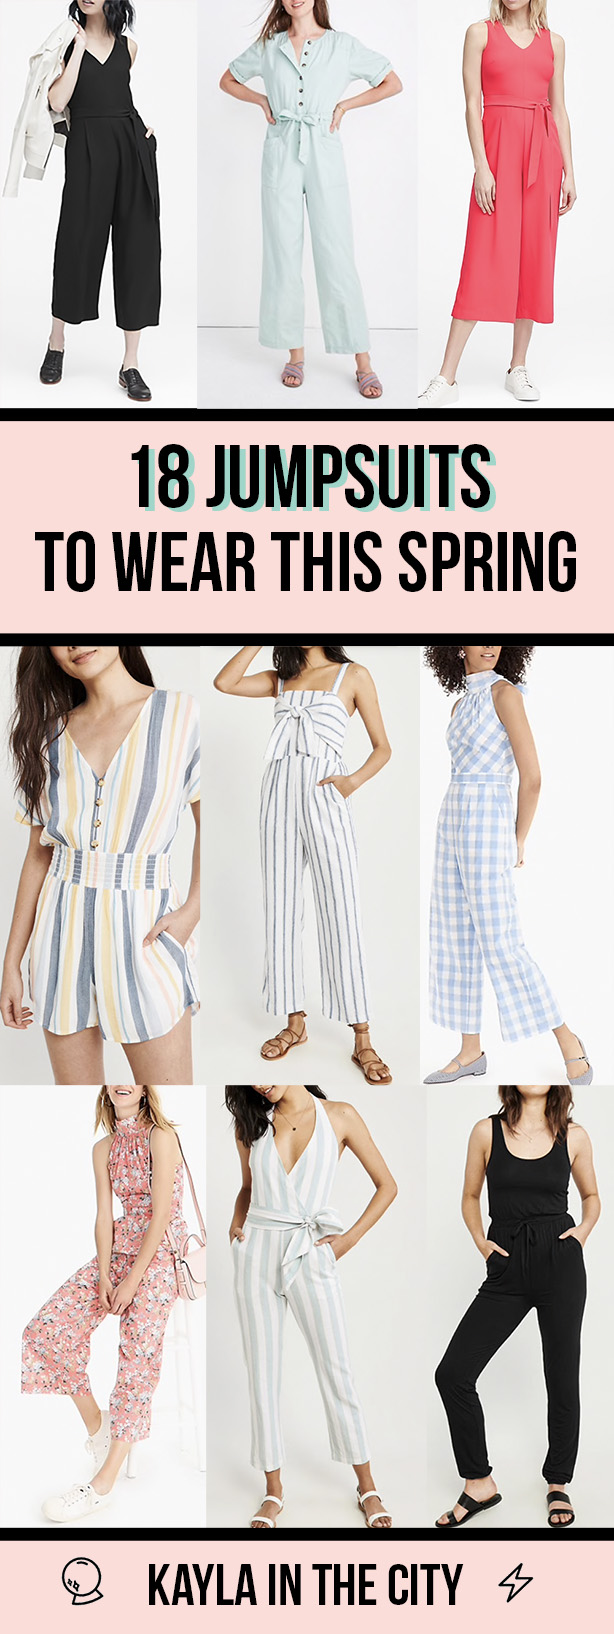 spring jumpsuits